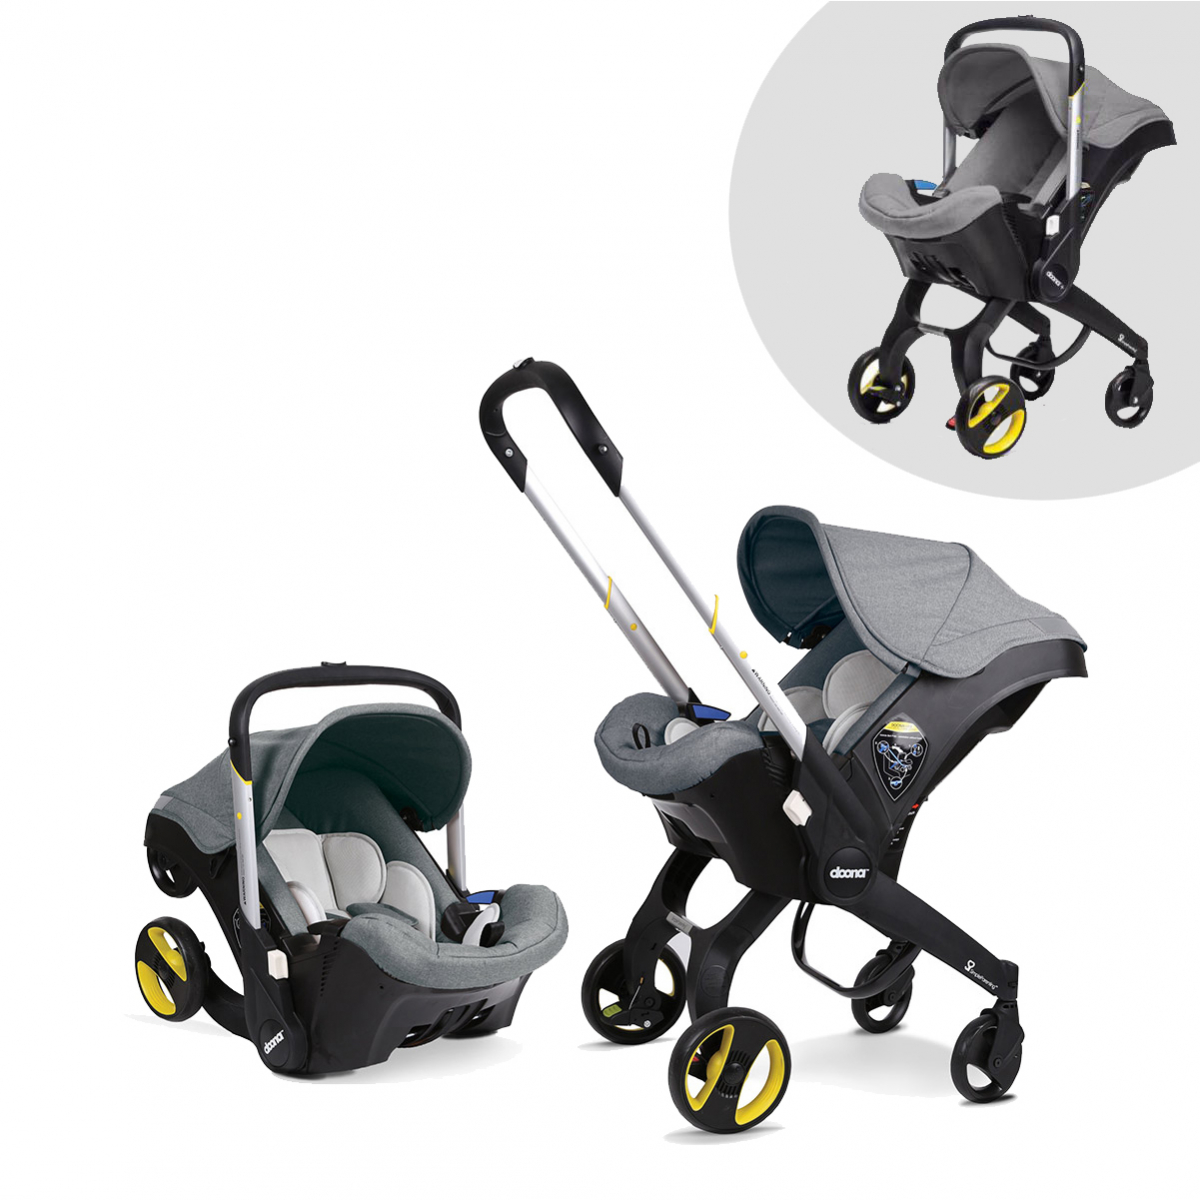 Luxury Travel Systems: High-End Strollers with Matching Car Seats for Ultimate Convenience